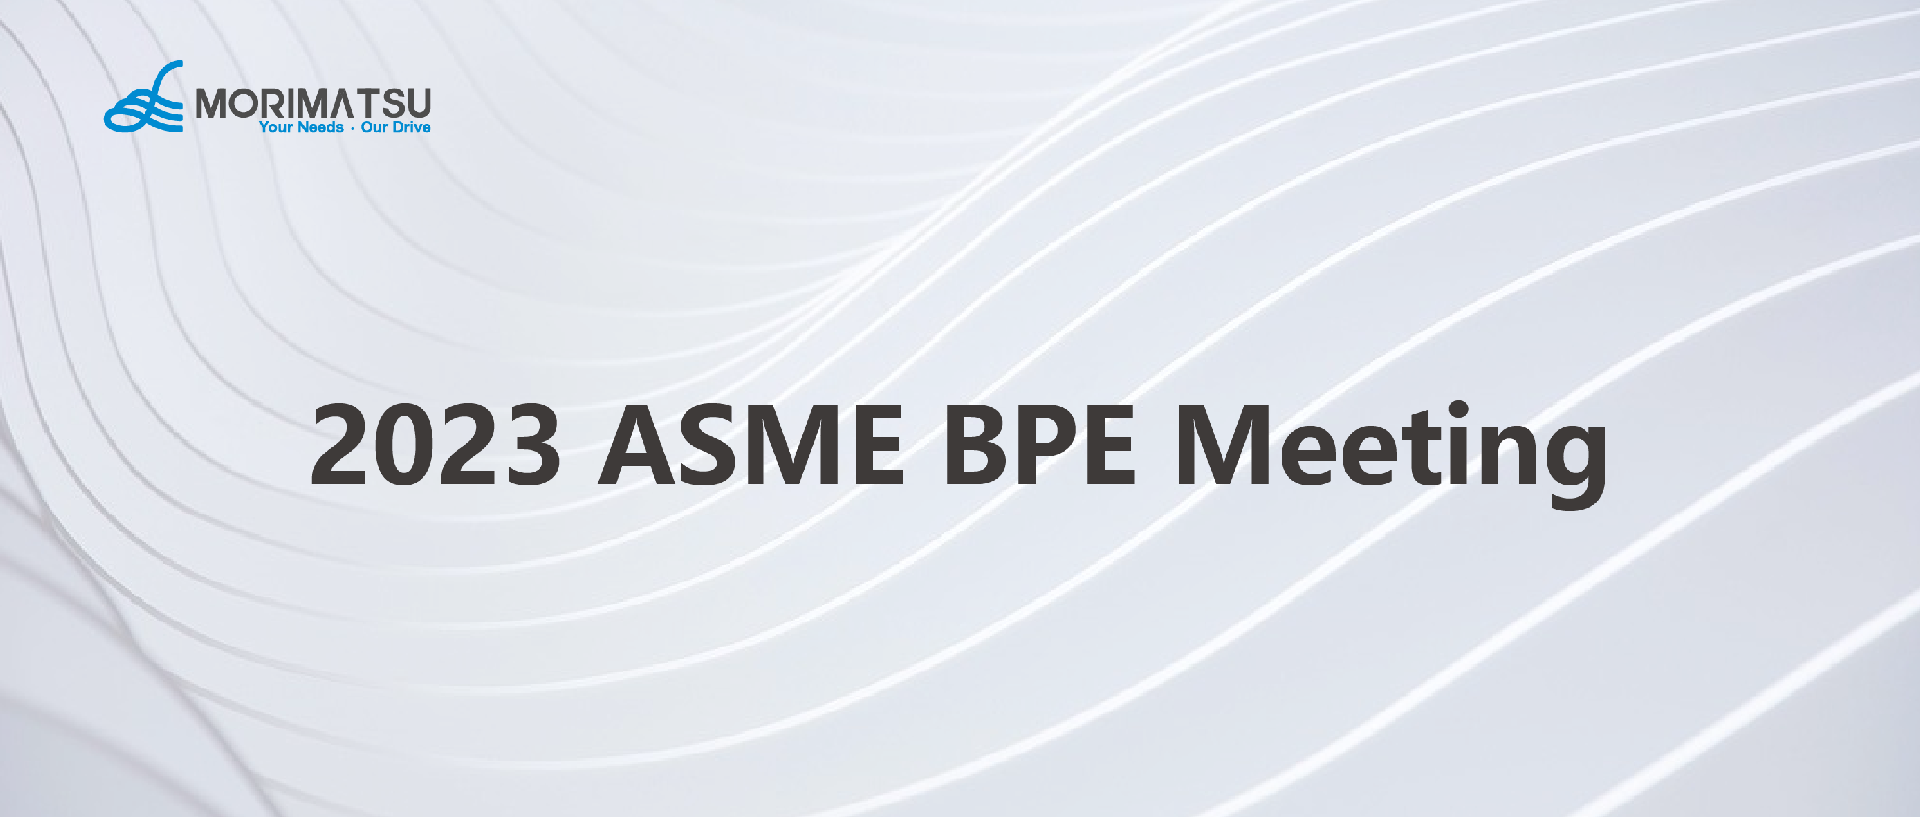 Conference Review | Morimatsu LifeSciences Participates in 2023 ASME BPE Meeting, Leading the Improvement of Standards for Biopharmaceuticals